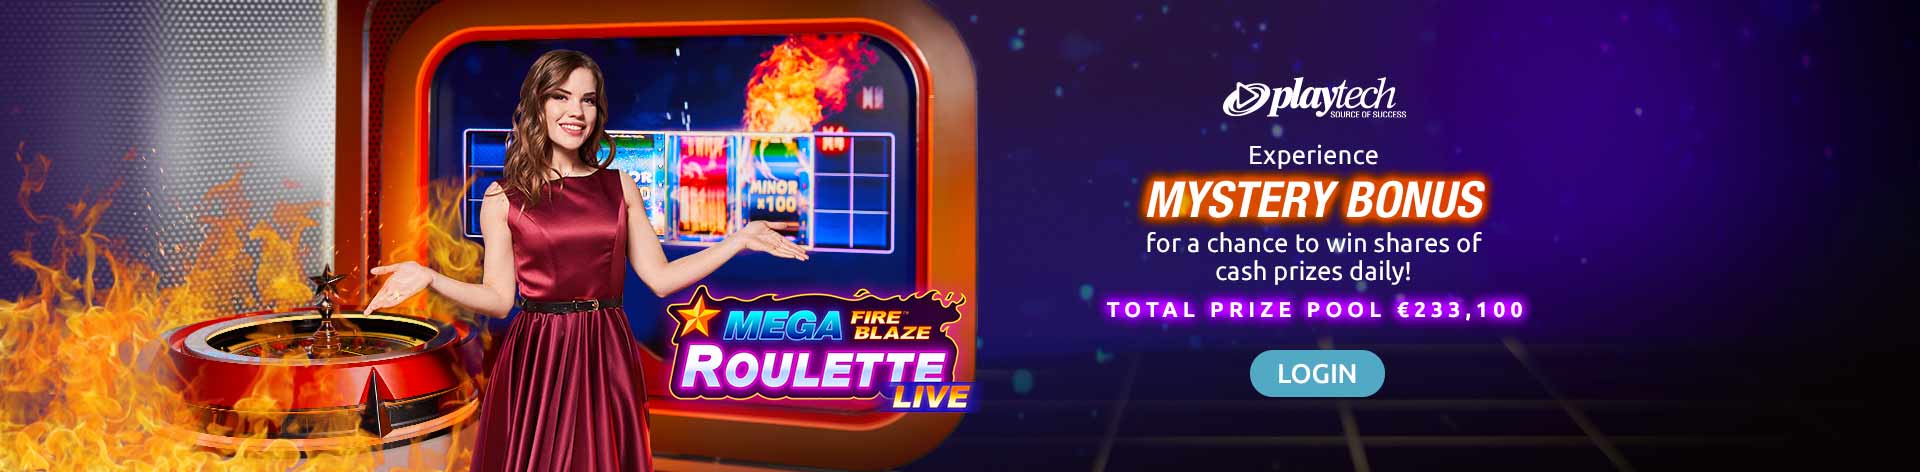 Experience Mystery Bonus for a chance to win shares of cash prizes daily! Total Prize Pool: €233,100.